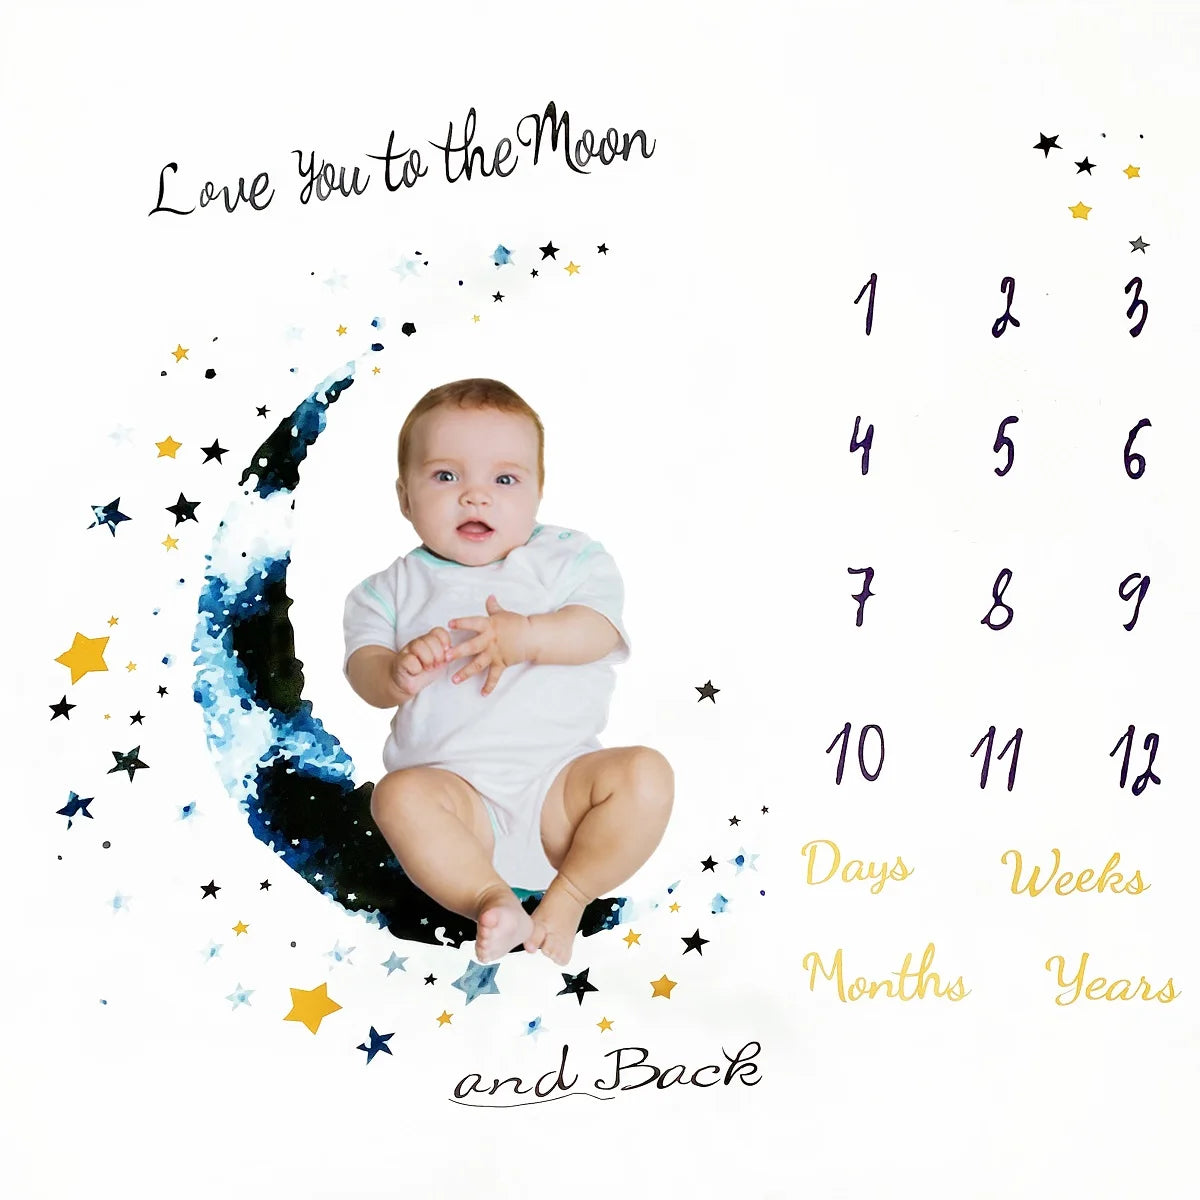 Baby Milestone Blanket Infant Photo Props Background Mats Portray Diaper Baby Calendar Grow Backdrop Cloth Photography Accessory